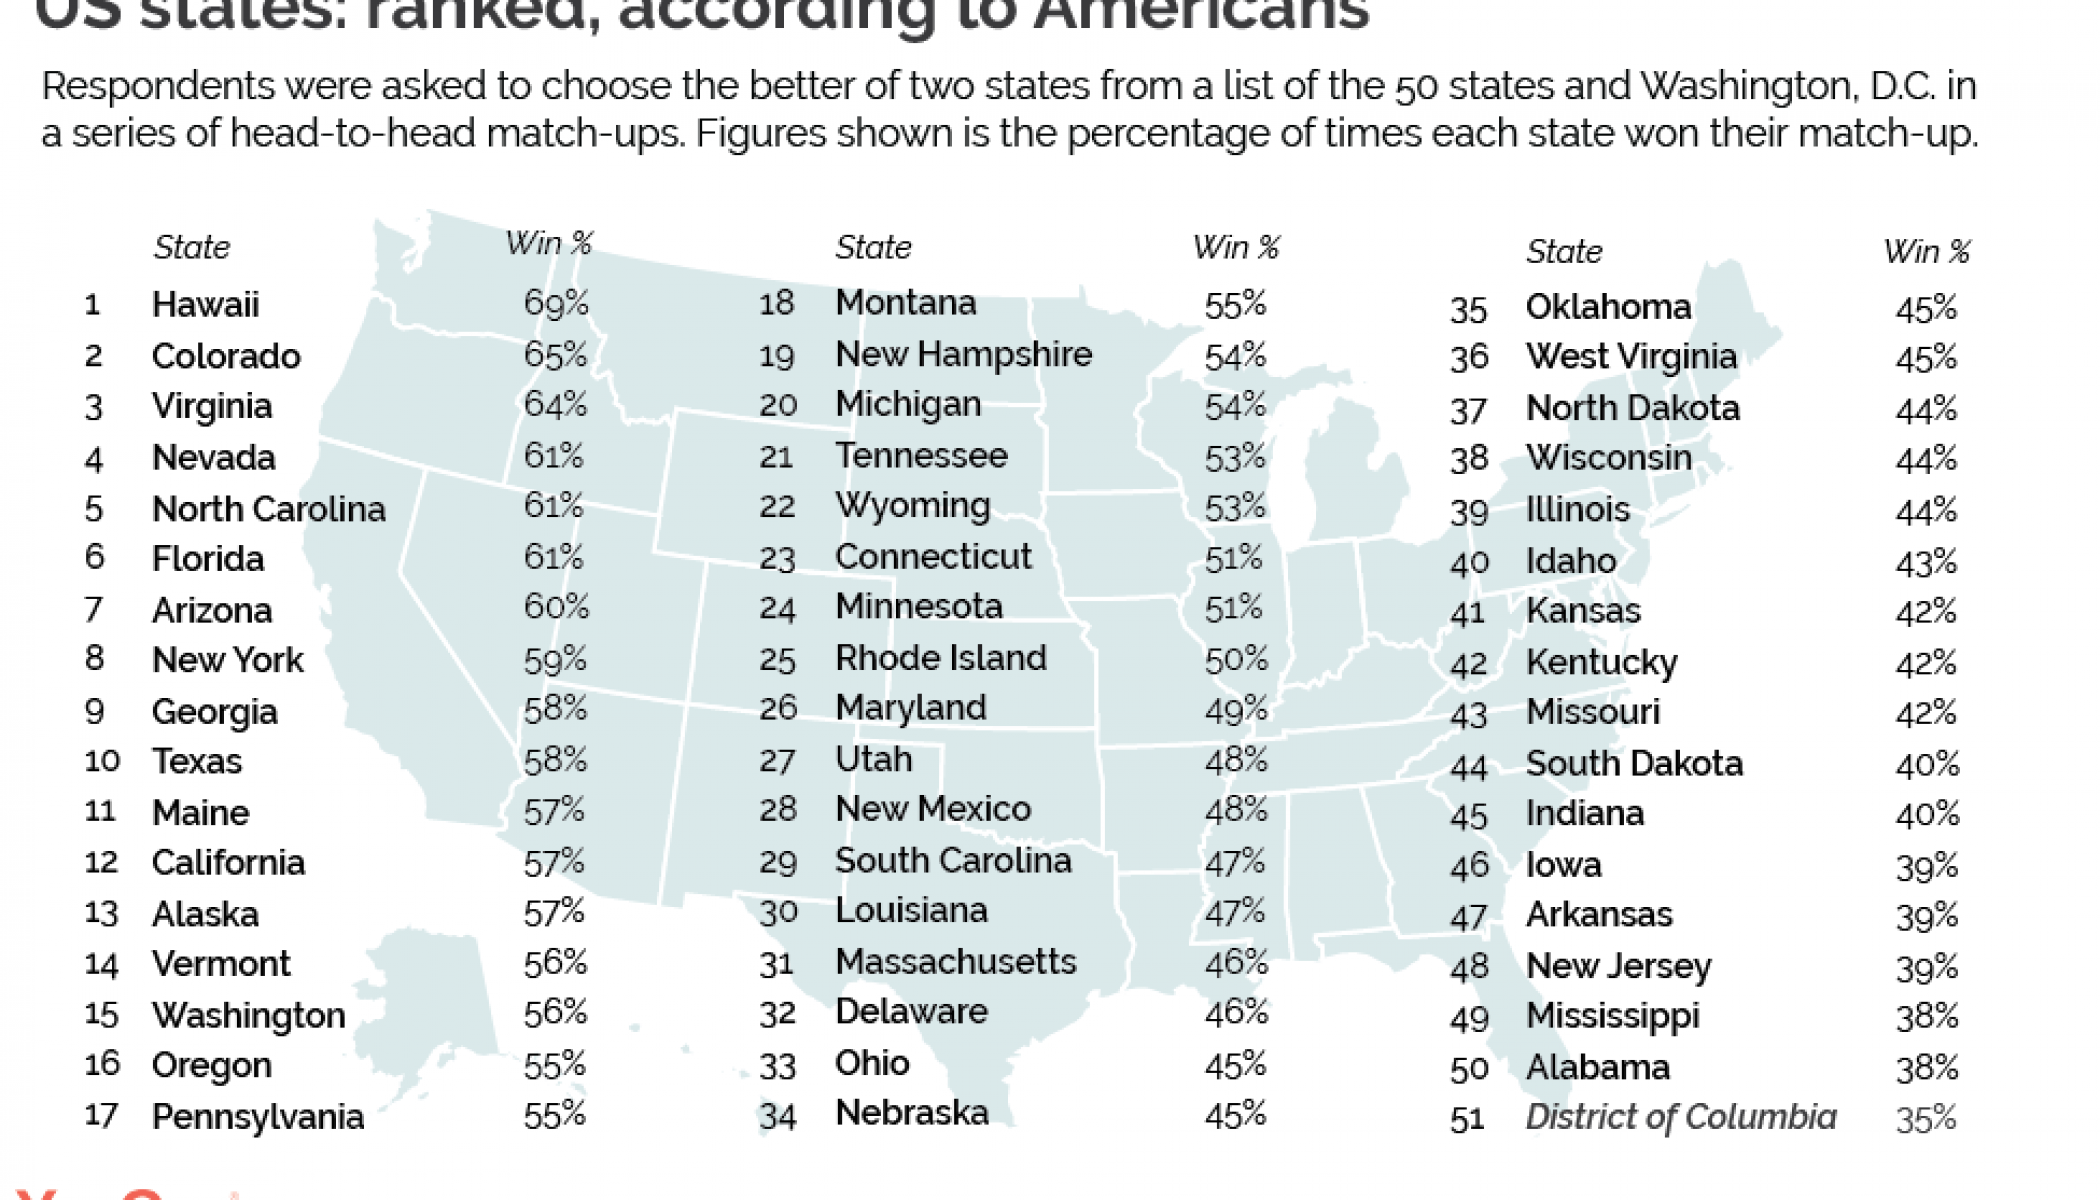 Here are all 50 U.S. states ranked from best to worst, according to